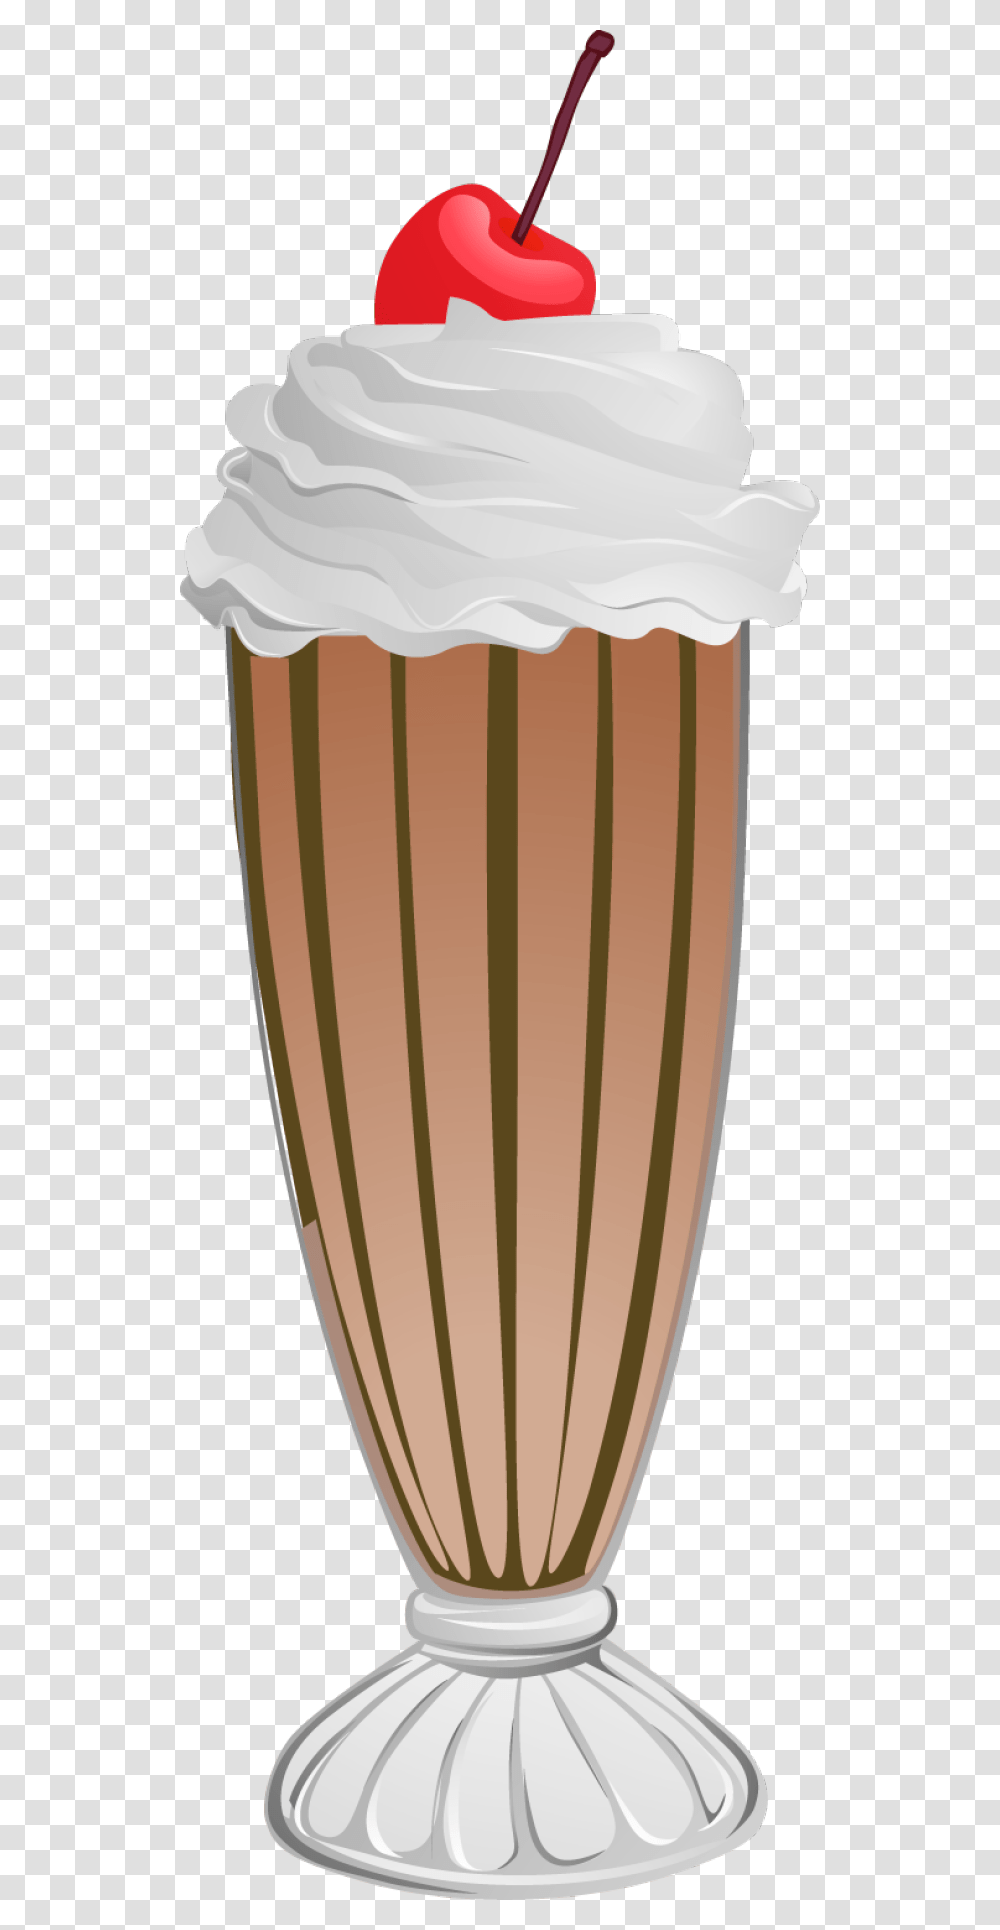 Stock Malt Free On Dumielauxepices Background Chocolate Milkshake Clipart, Lamp, Sweets, Food, Plant Transparent Png